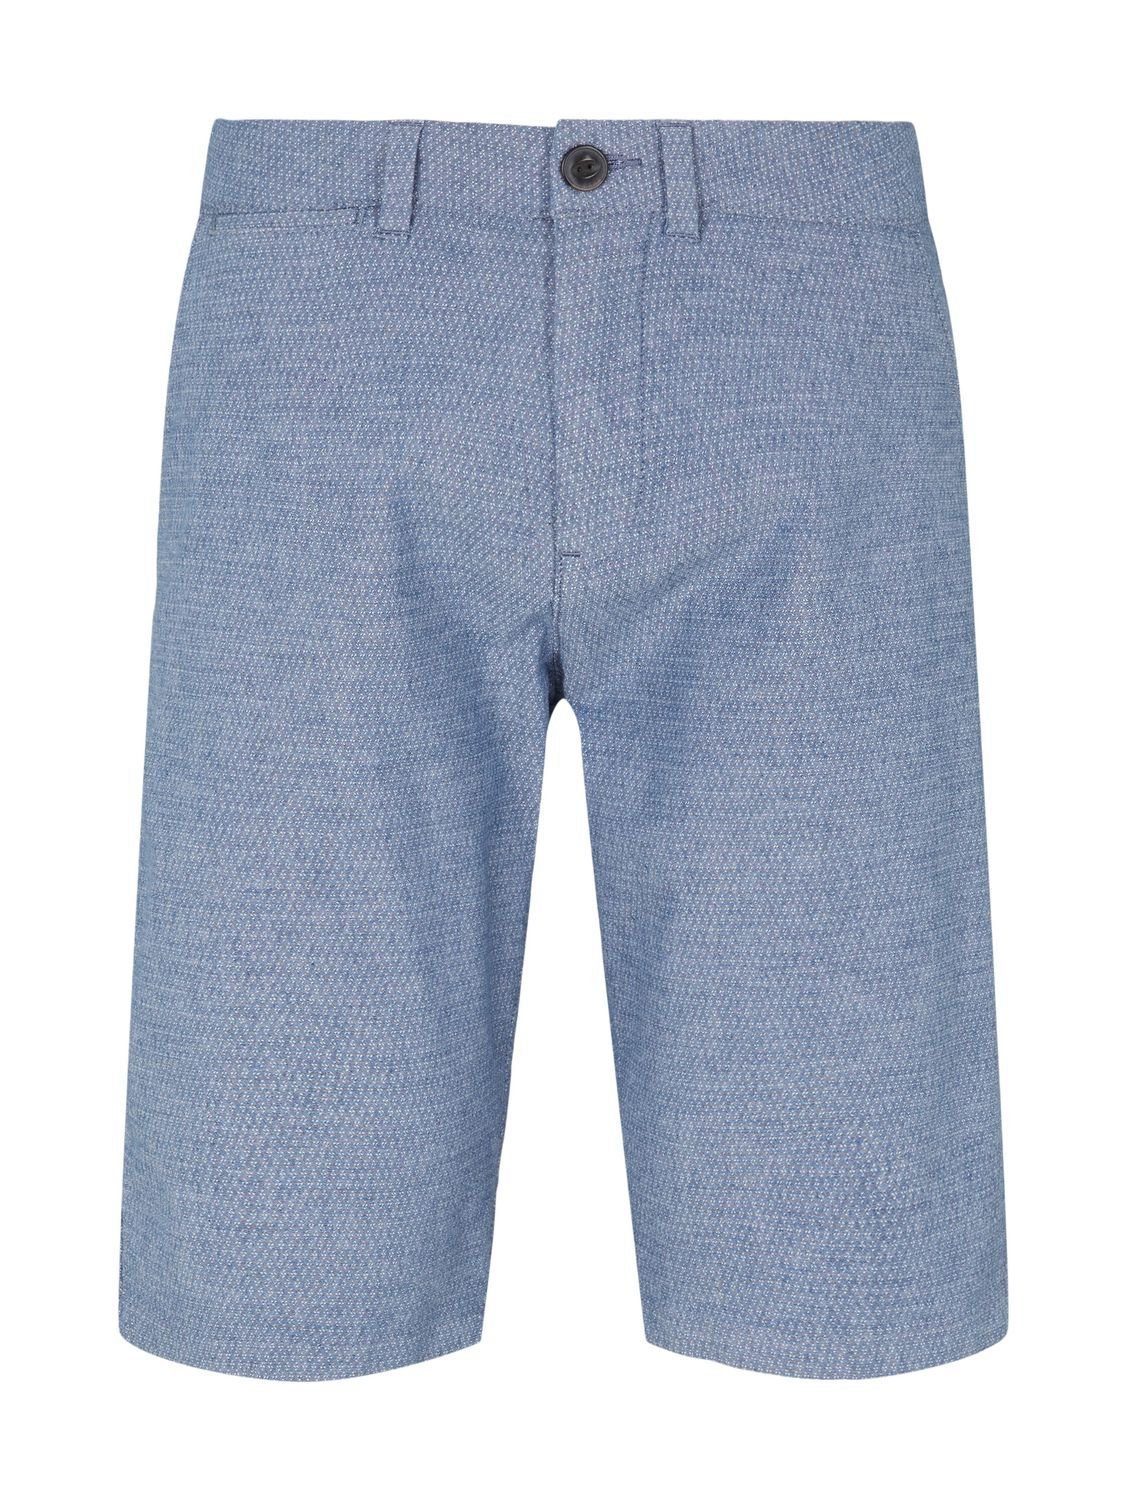 Dobby STRUCTURED Look TOM TAILOR 29300 Chambray mit Shorts Stretch